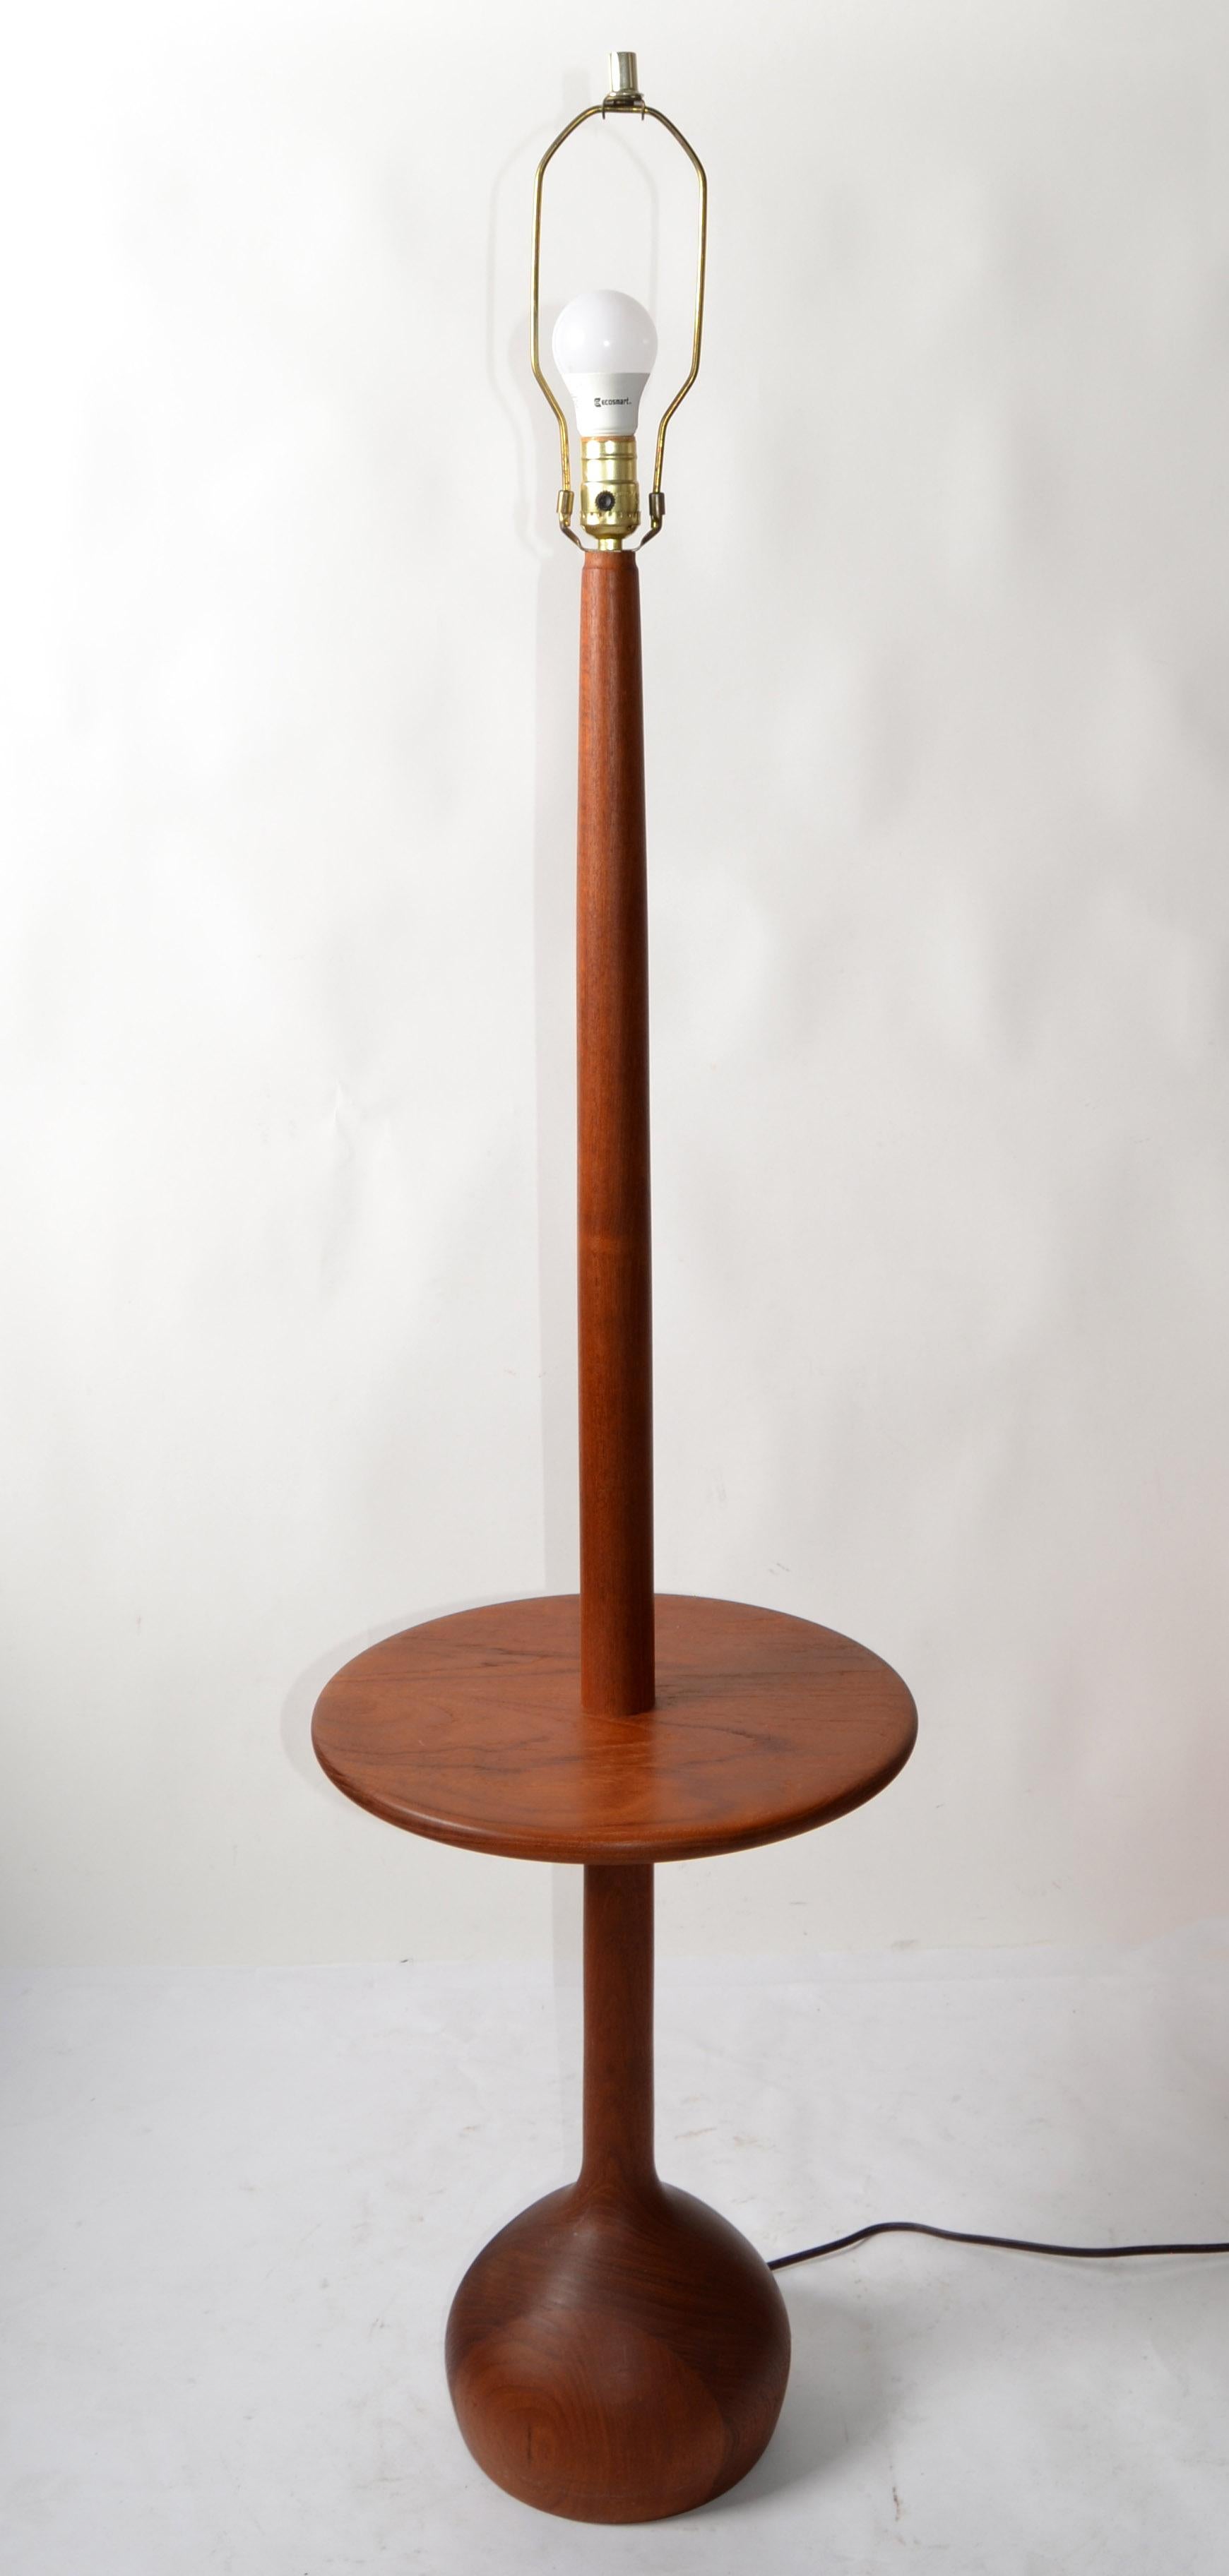 Nessen Lighting Style Turned Walnut Floor Lamp Mid-Century Modern Fabric Shade In Good Condition For Sale In Miami, FL